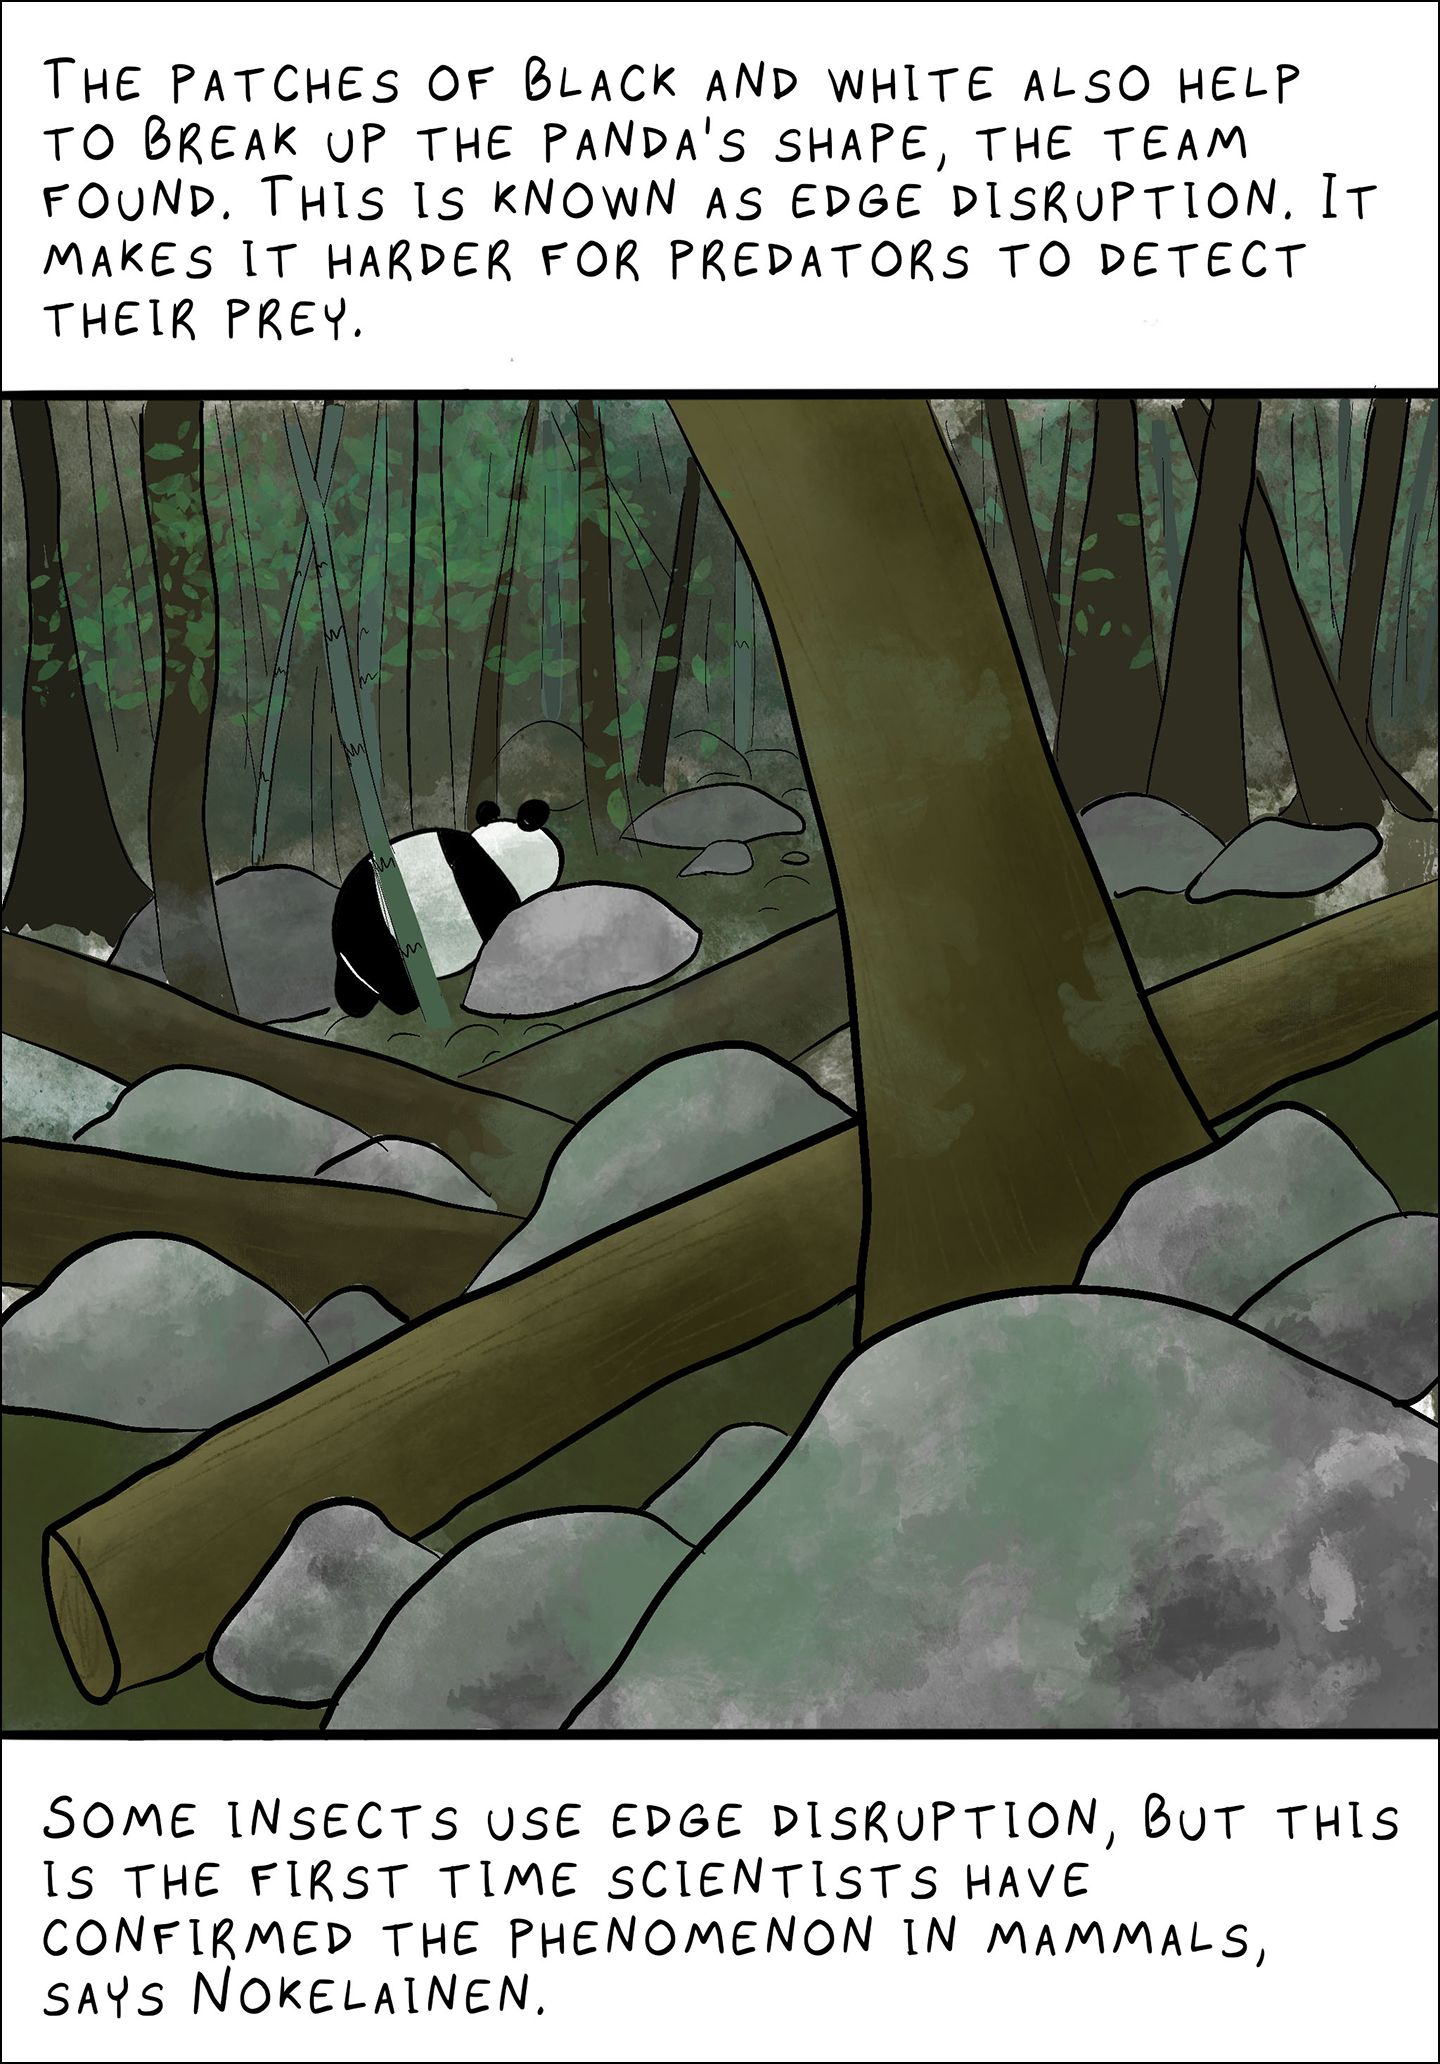 Text: The patches of black and white also help to break up the panda’s shape, the team found. This is known as edge disruption. It makes it harder for predators to detect their prey.  Some insects use edge disruption, but this is the first time scientists have confirmed the phenomenon in mammals, says Nokelainen. Image: A panda several feet away. The panda is facing away from the viewer and napping with its head on a rock. 